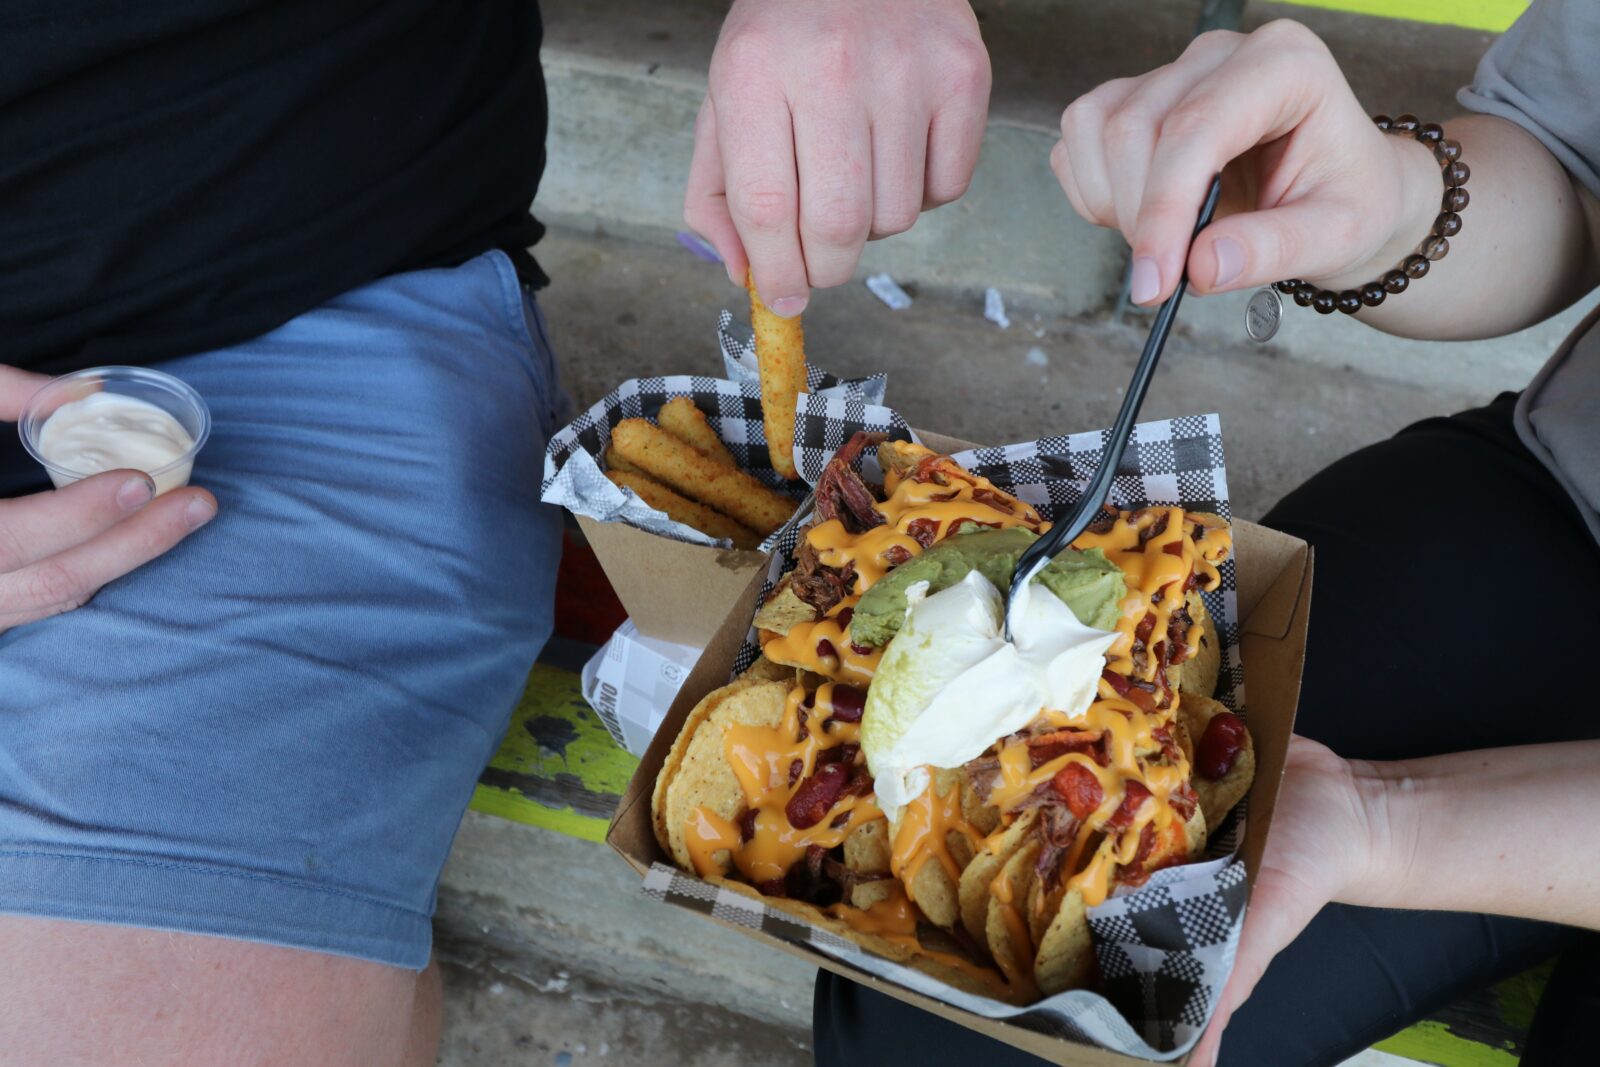 Two hands are shown one picking up a hot chip and one holding a fork poised over a dish of nachos